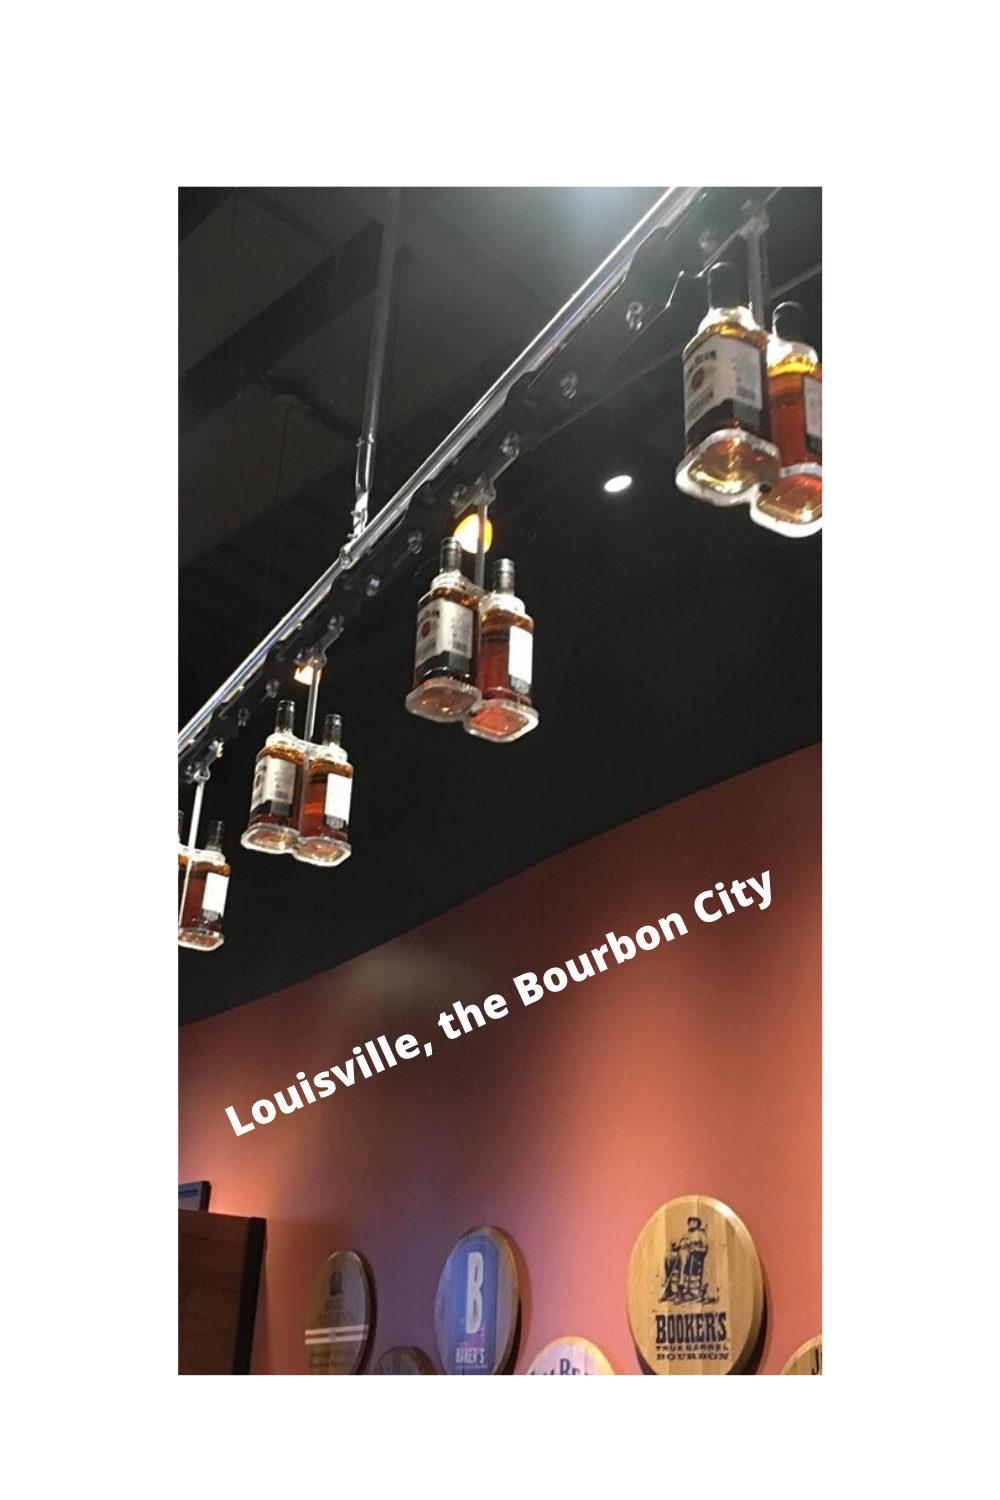 Read more about the article Louisville, the Bourbon City